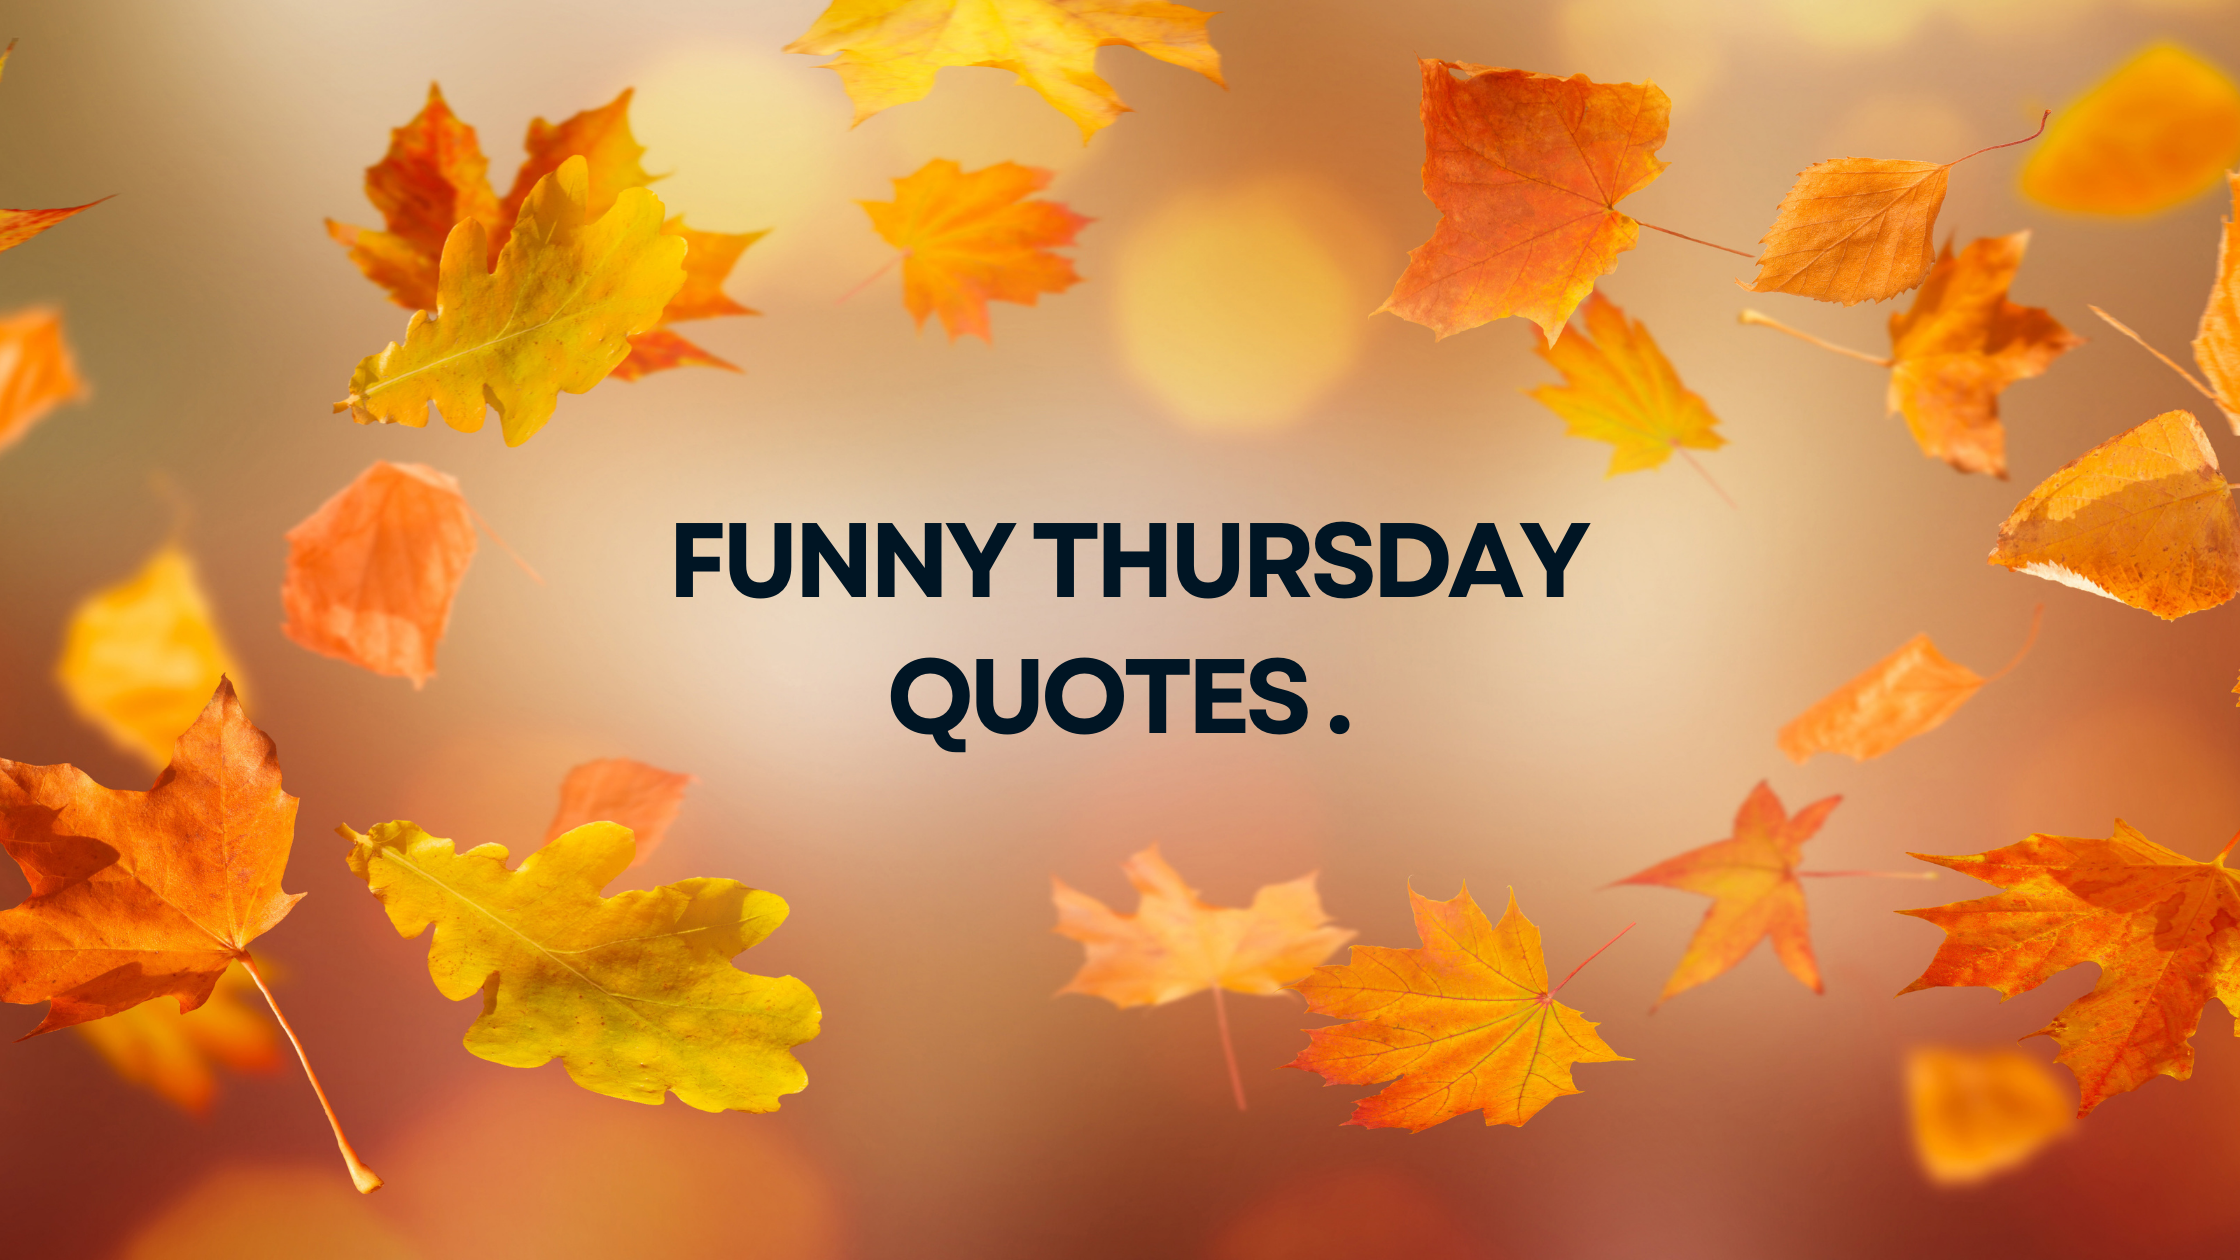 Funny Thursday Quotes